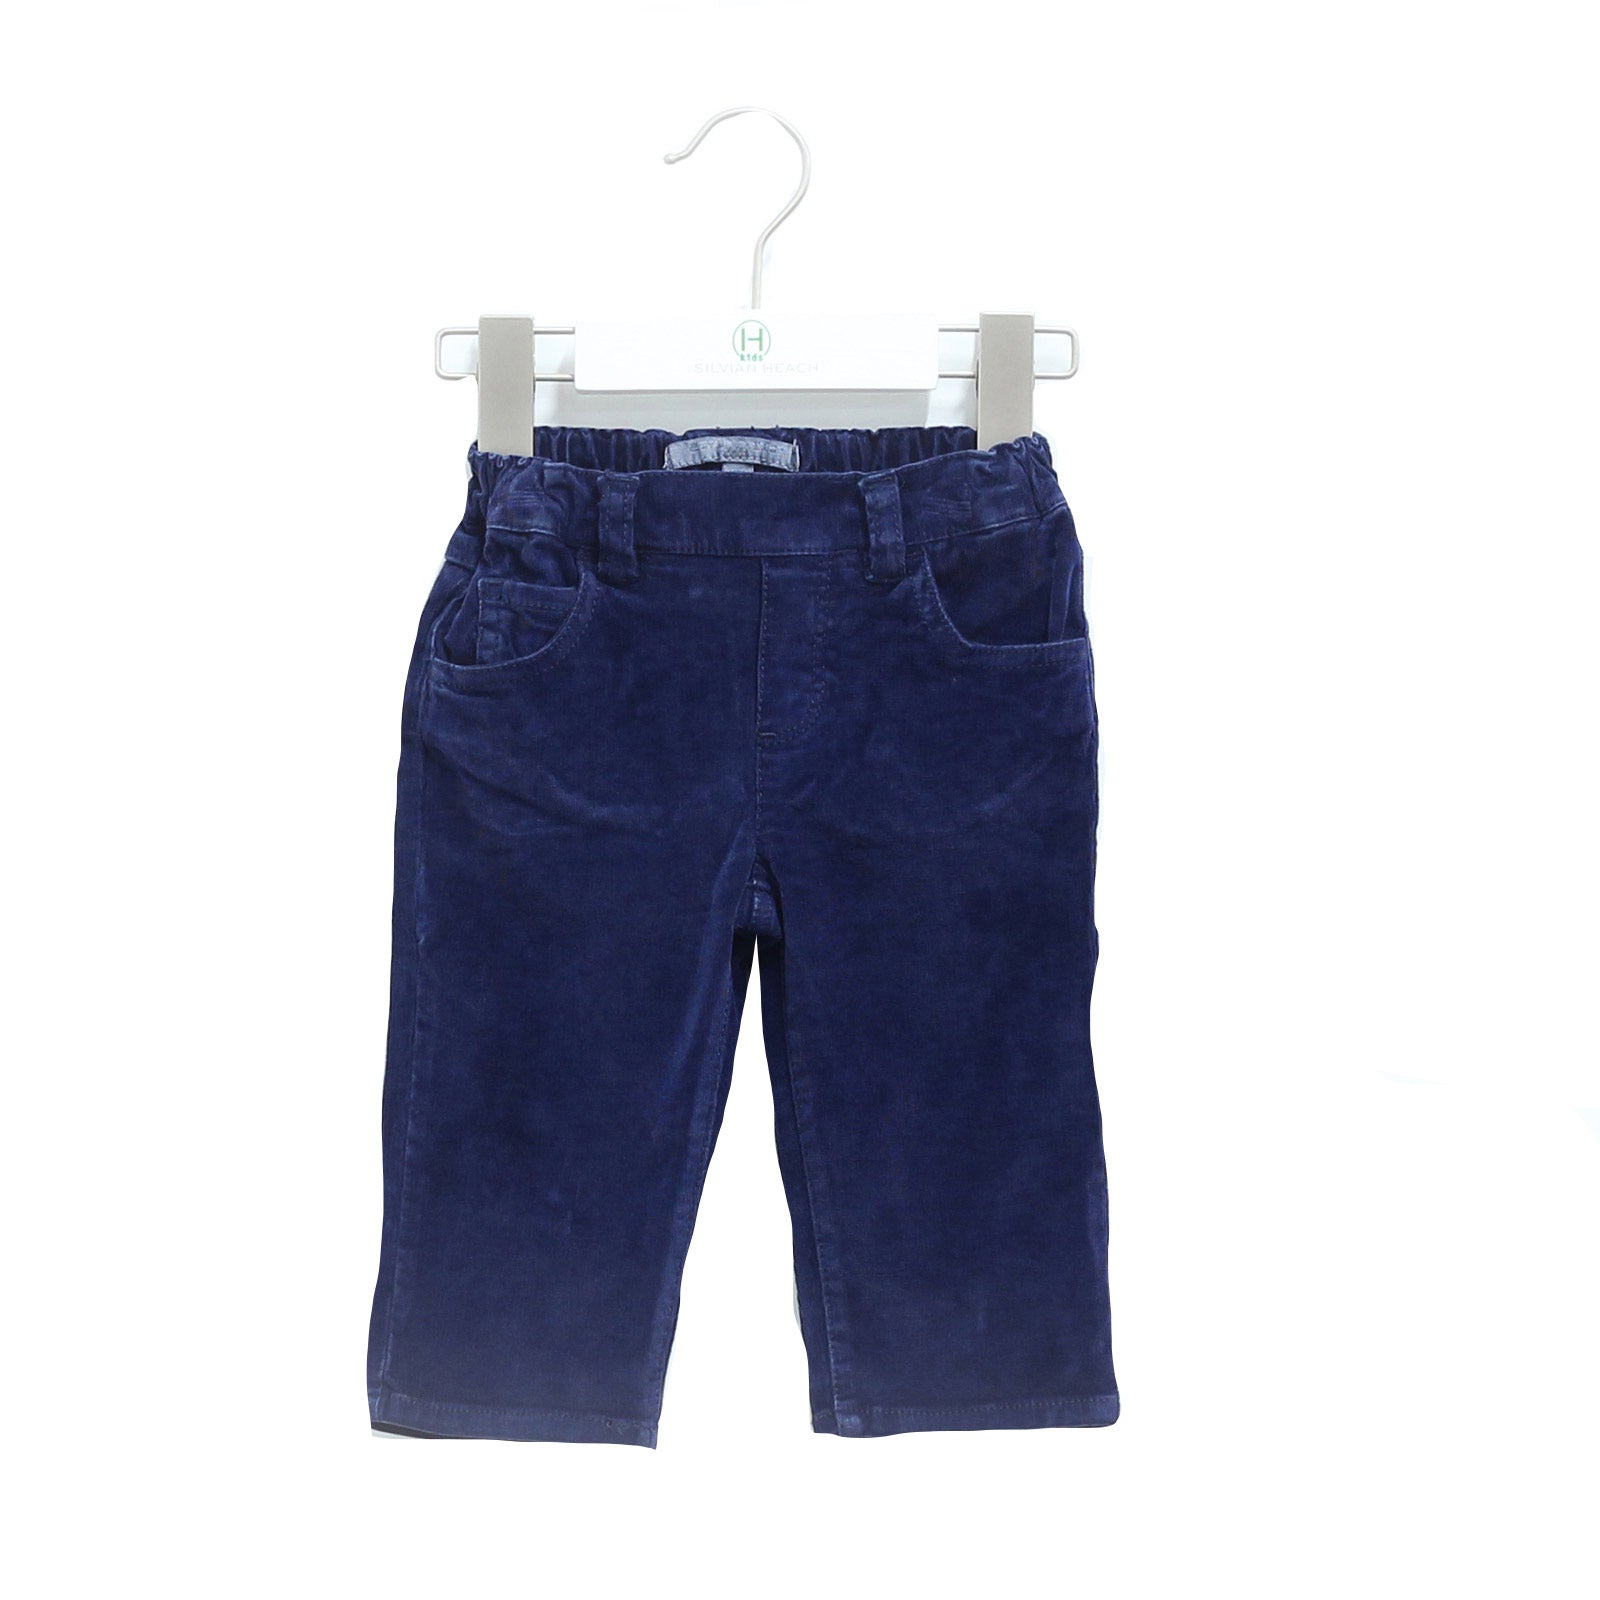 
  Silvian Heach Kids velvet trousers from the Silvian Heach Kids clothing line with adjustable w...